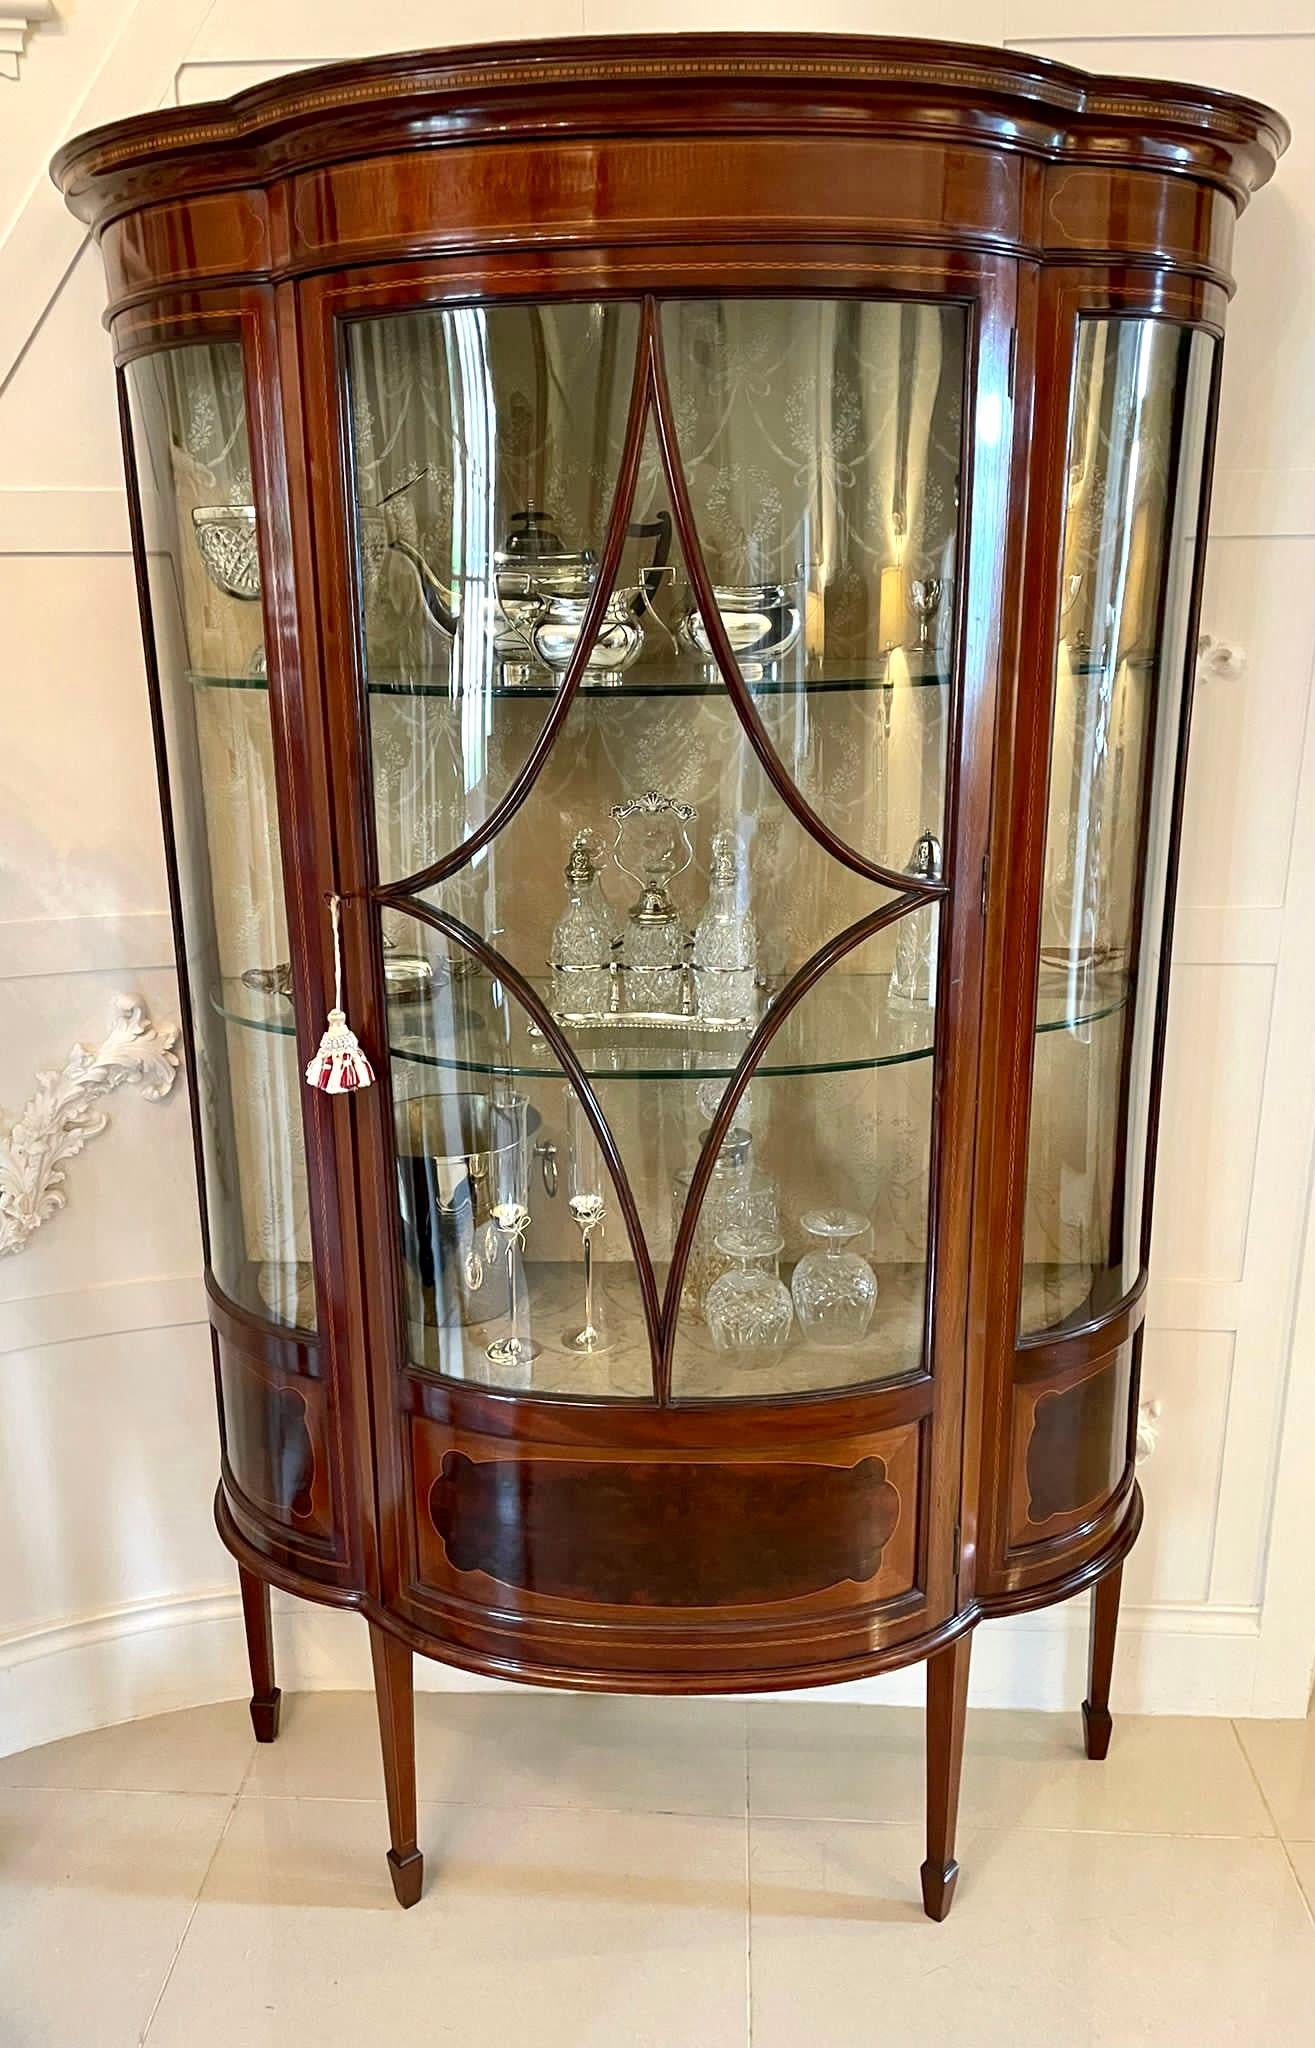 Fine Quality Antique Edwardian Inlaid Mahogany Shaped Display Cabinet In Good Condition For Sale In Suffolk, GB